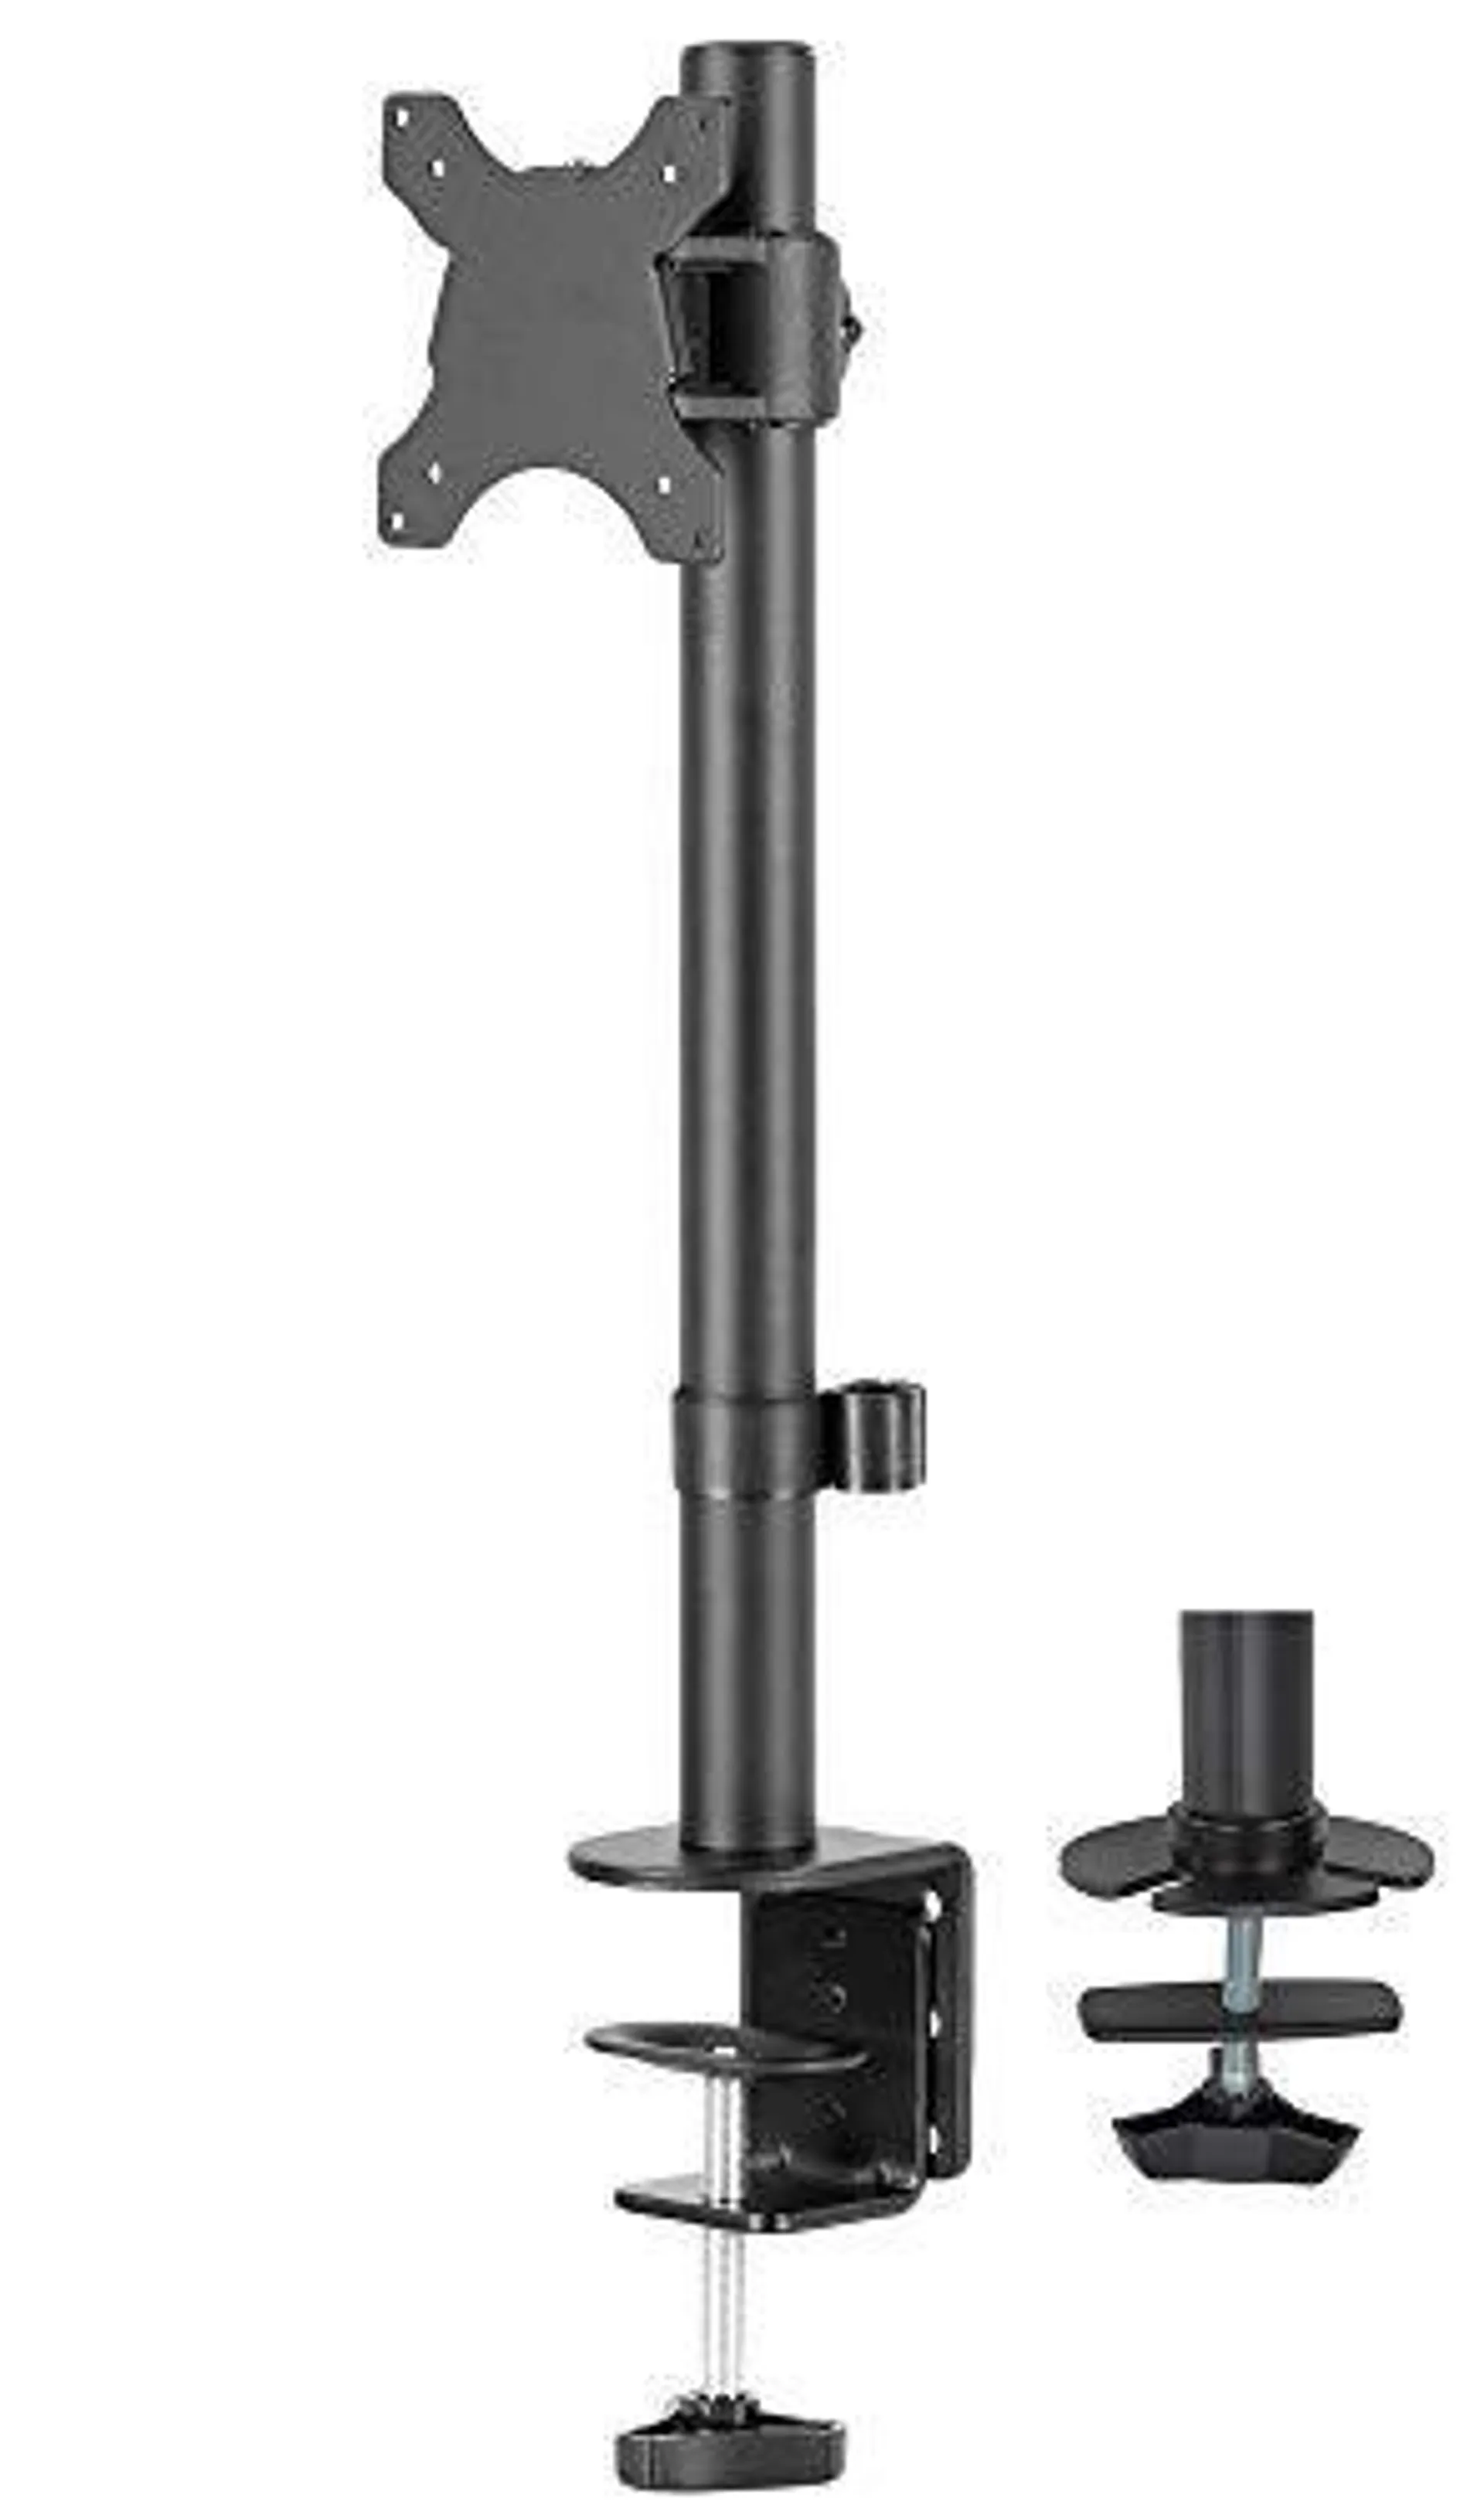 vivo single monitor fully adjustable desk mount stand for 1 led lcd screen up to 38 inches, stand-v101a